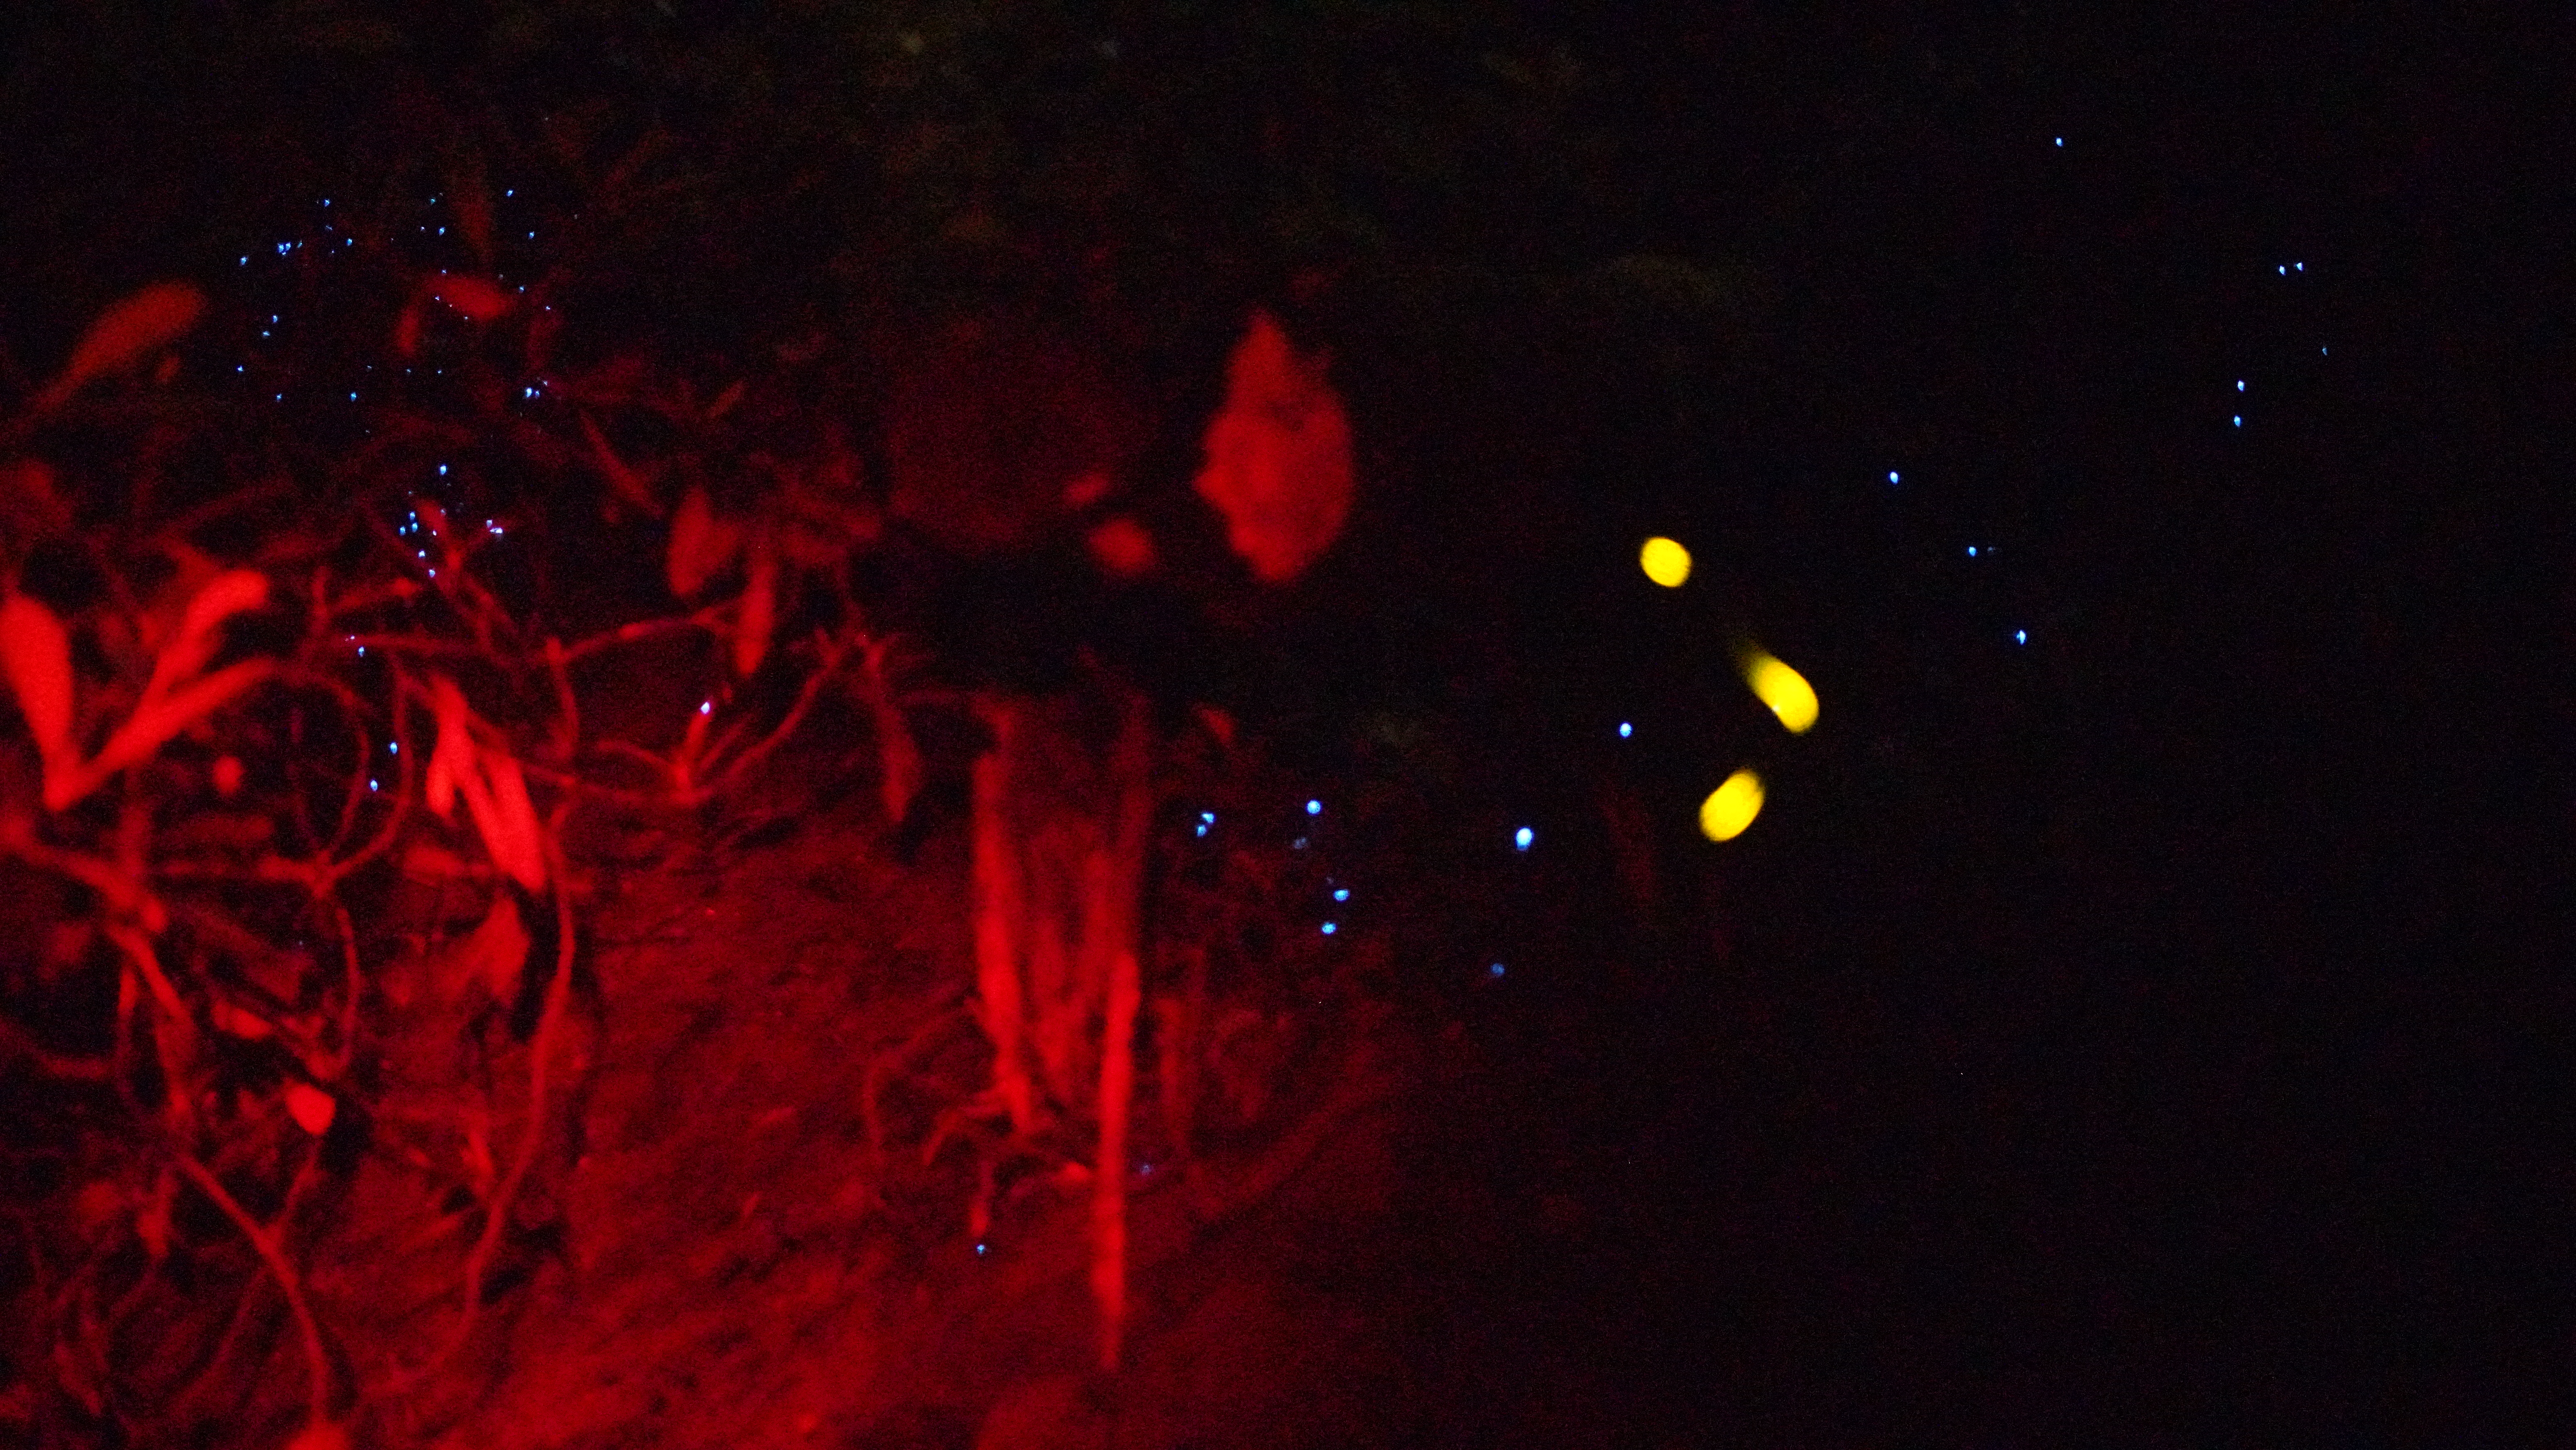 gnat larvae glow and firefly flash